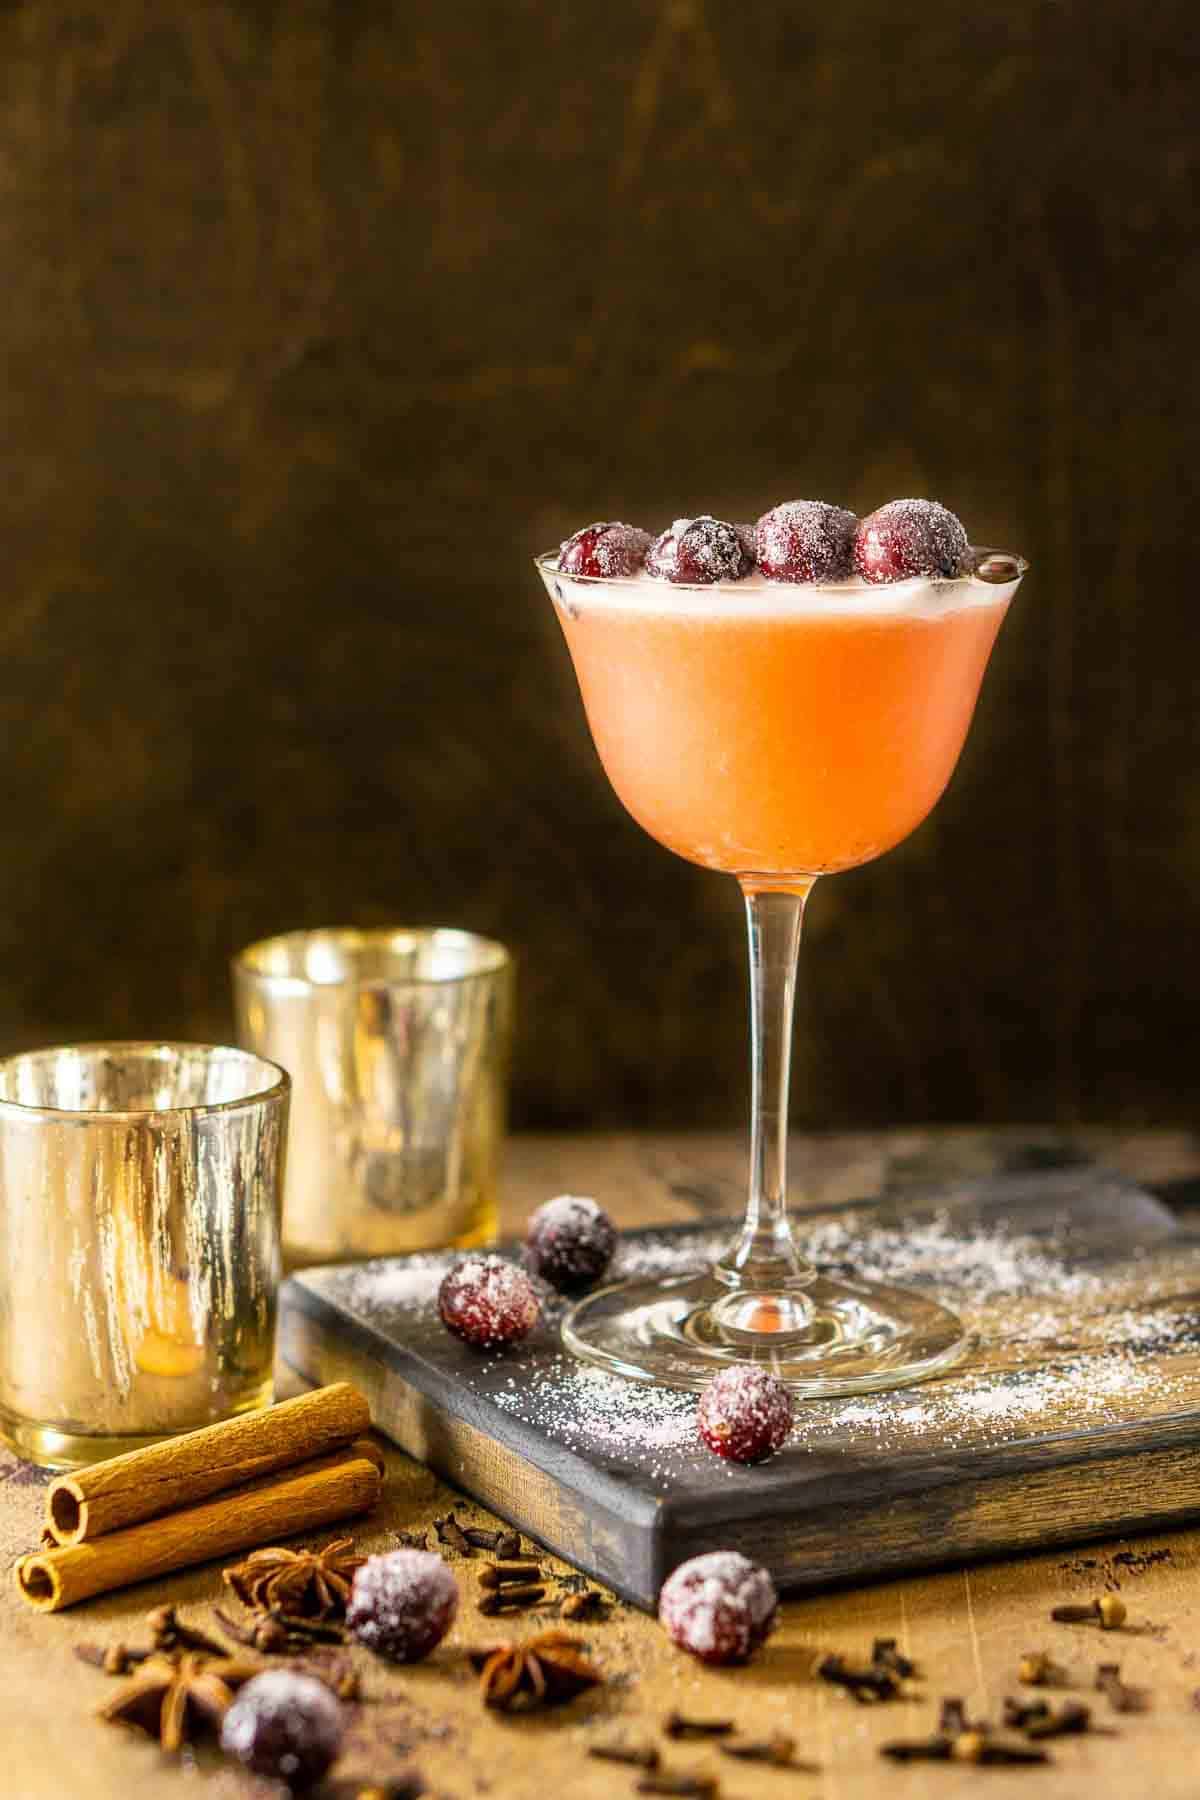 The cranberry bourbon sour with sugared cranberries and decor around it.